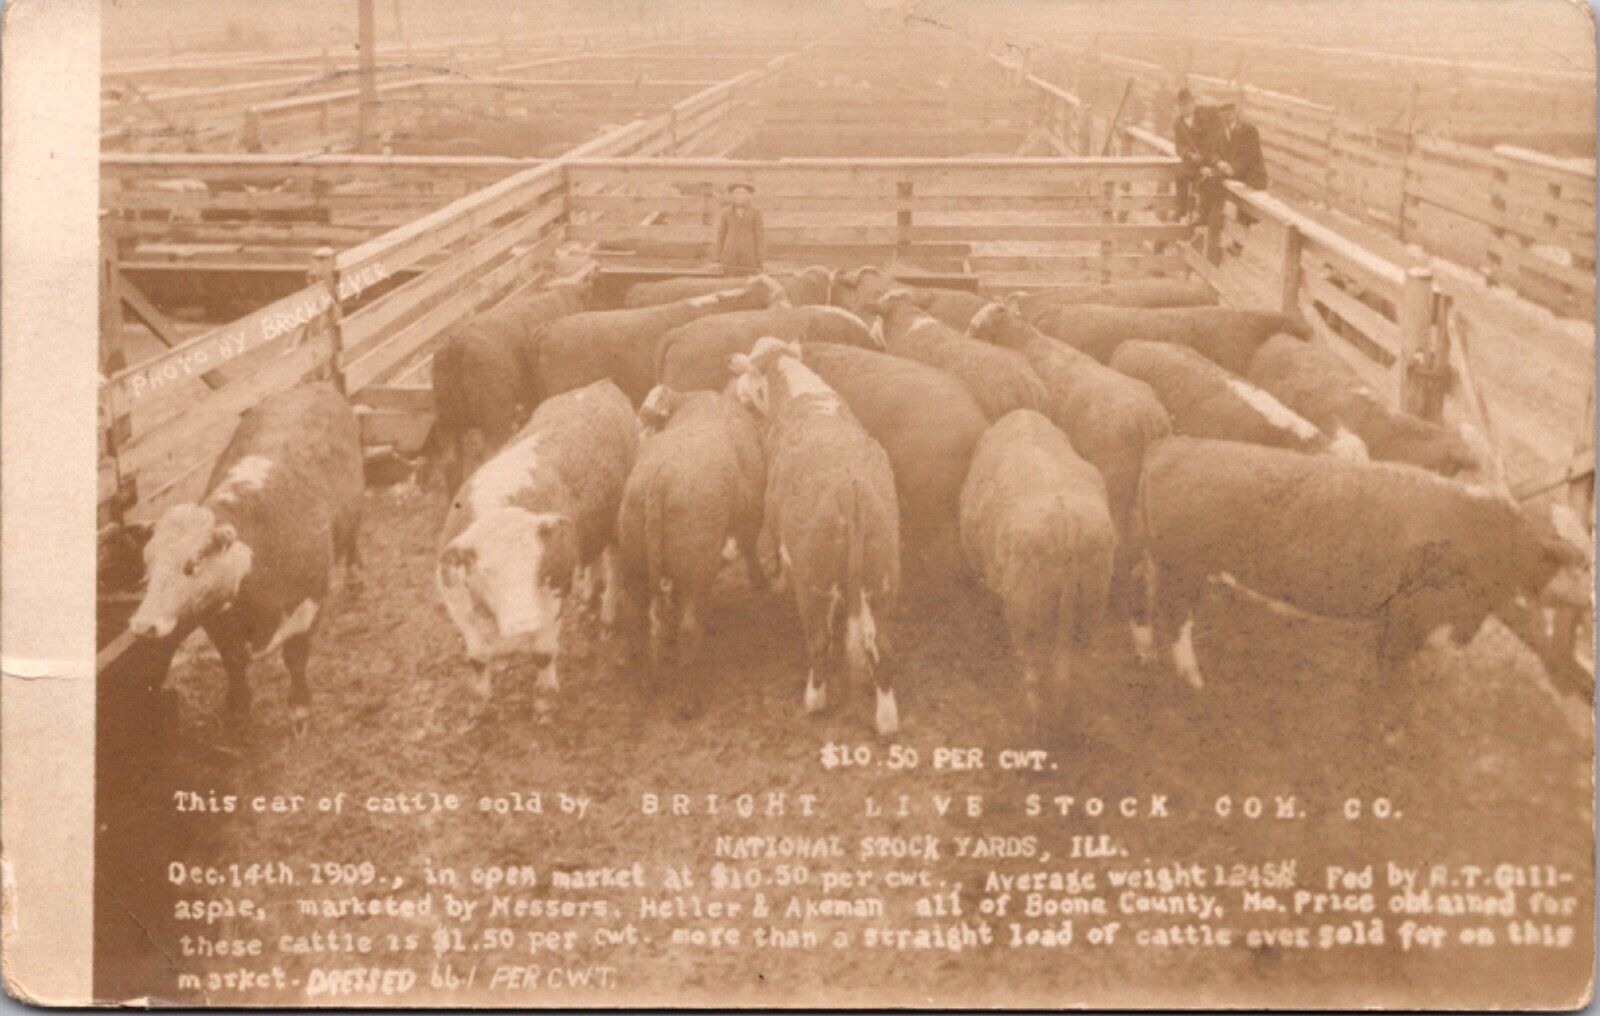 RPPC 1909 Cattle Sold by Bright Live Stock Yard Co National Stock Yards Illinois